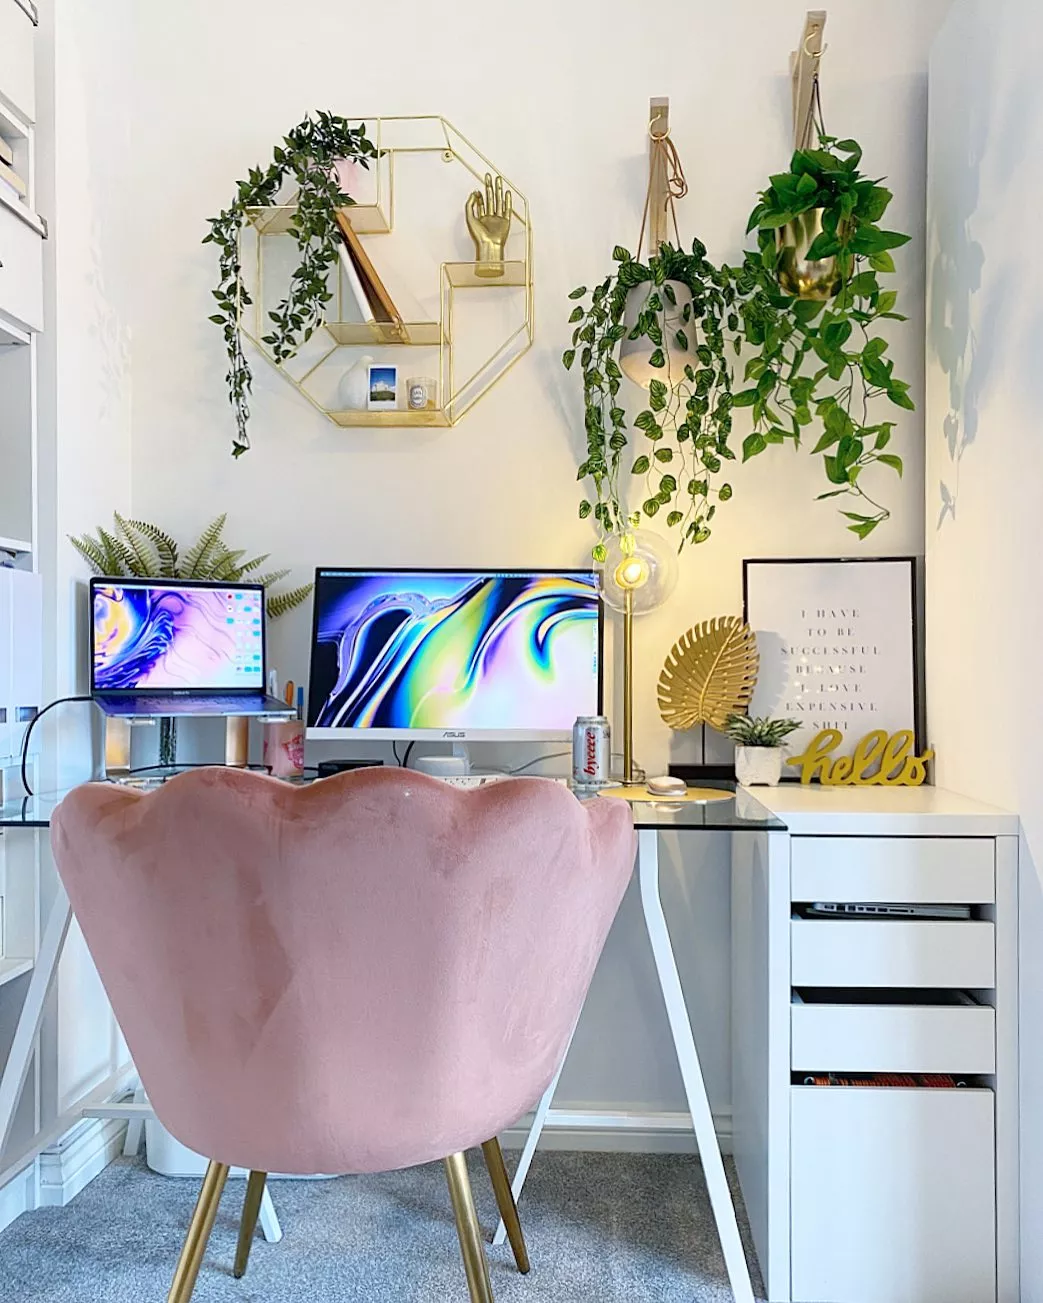 https://www.extraspace.com/blog/wp-content/uploads/2020/04/create-productive-work-from-home-office-personalize.jpg.webp